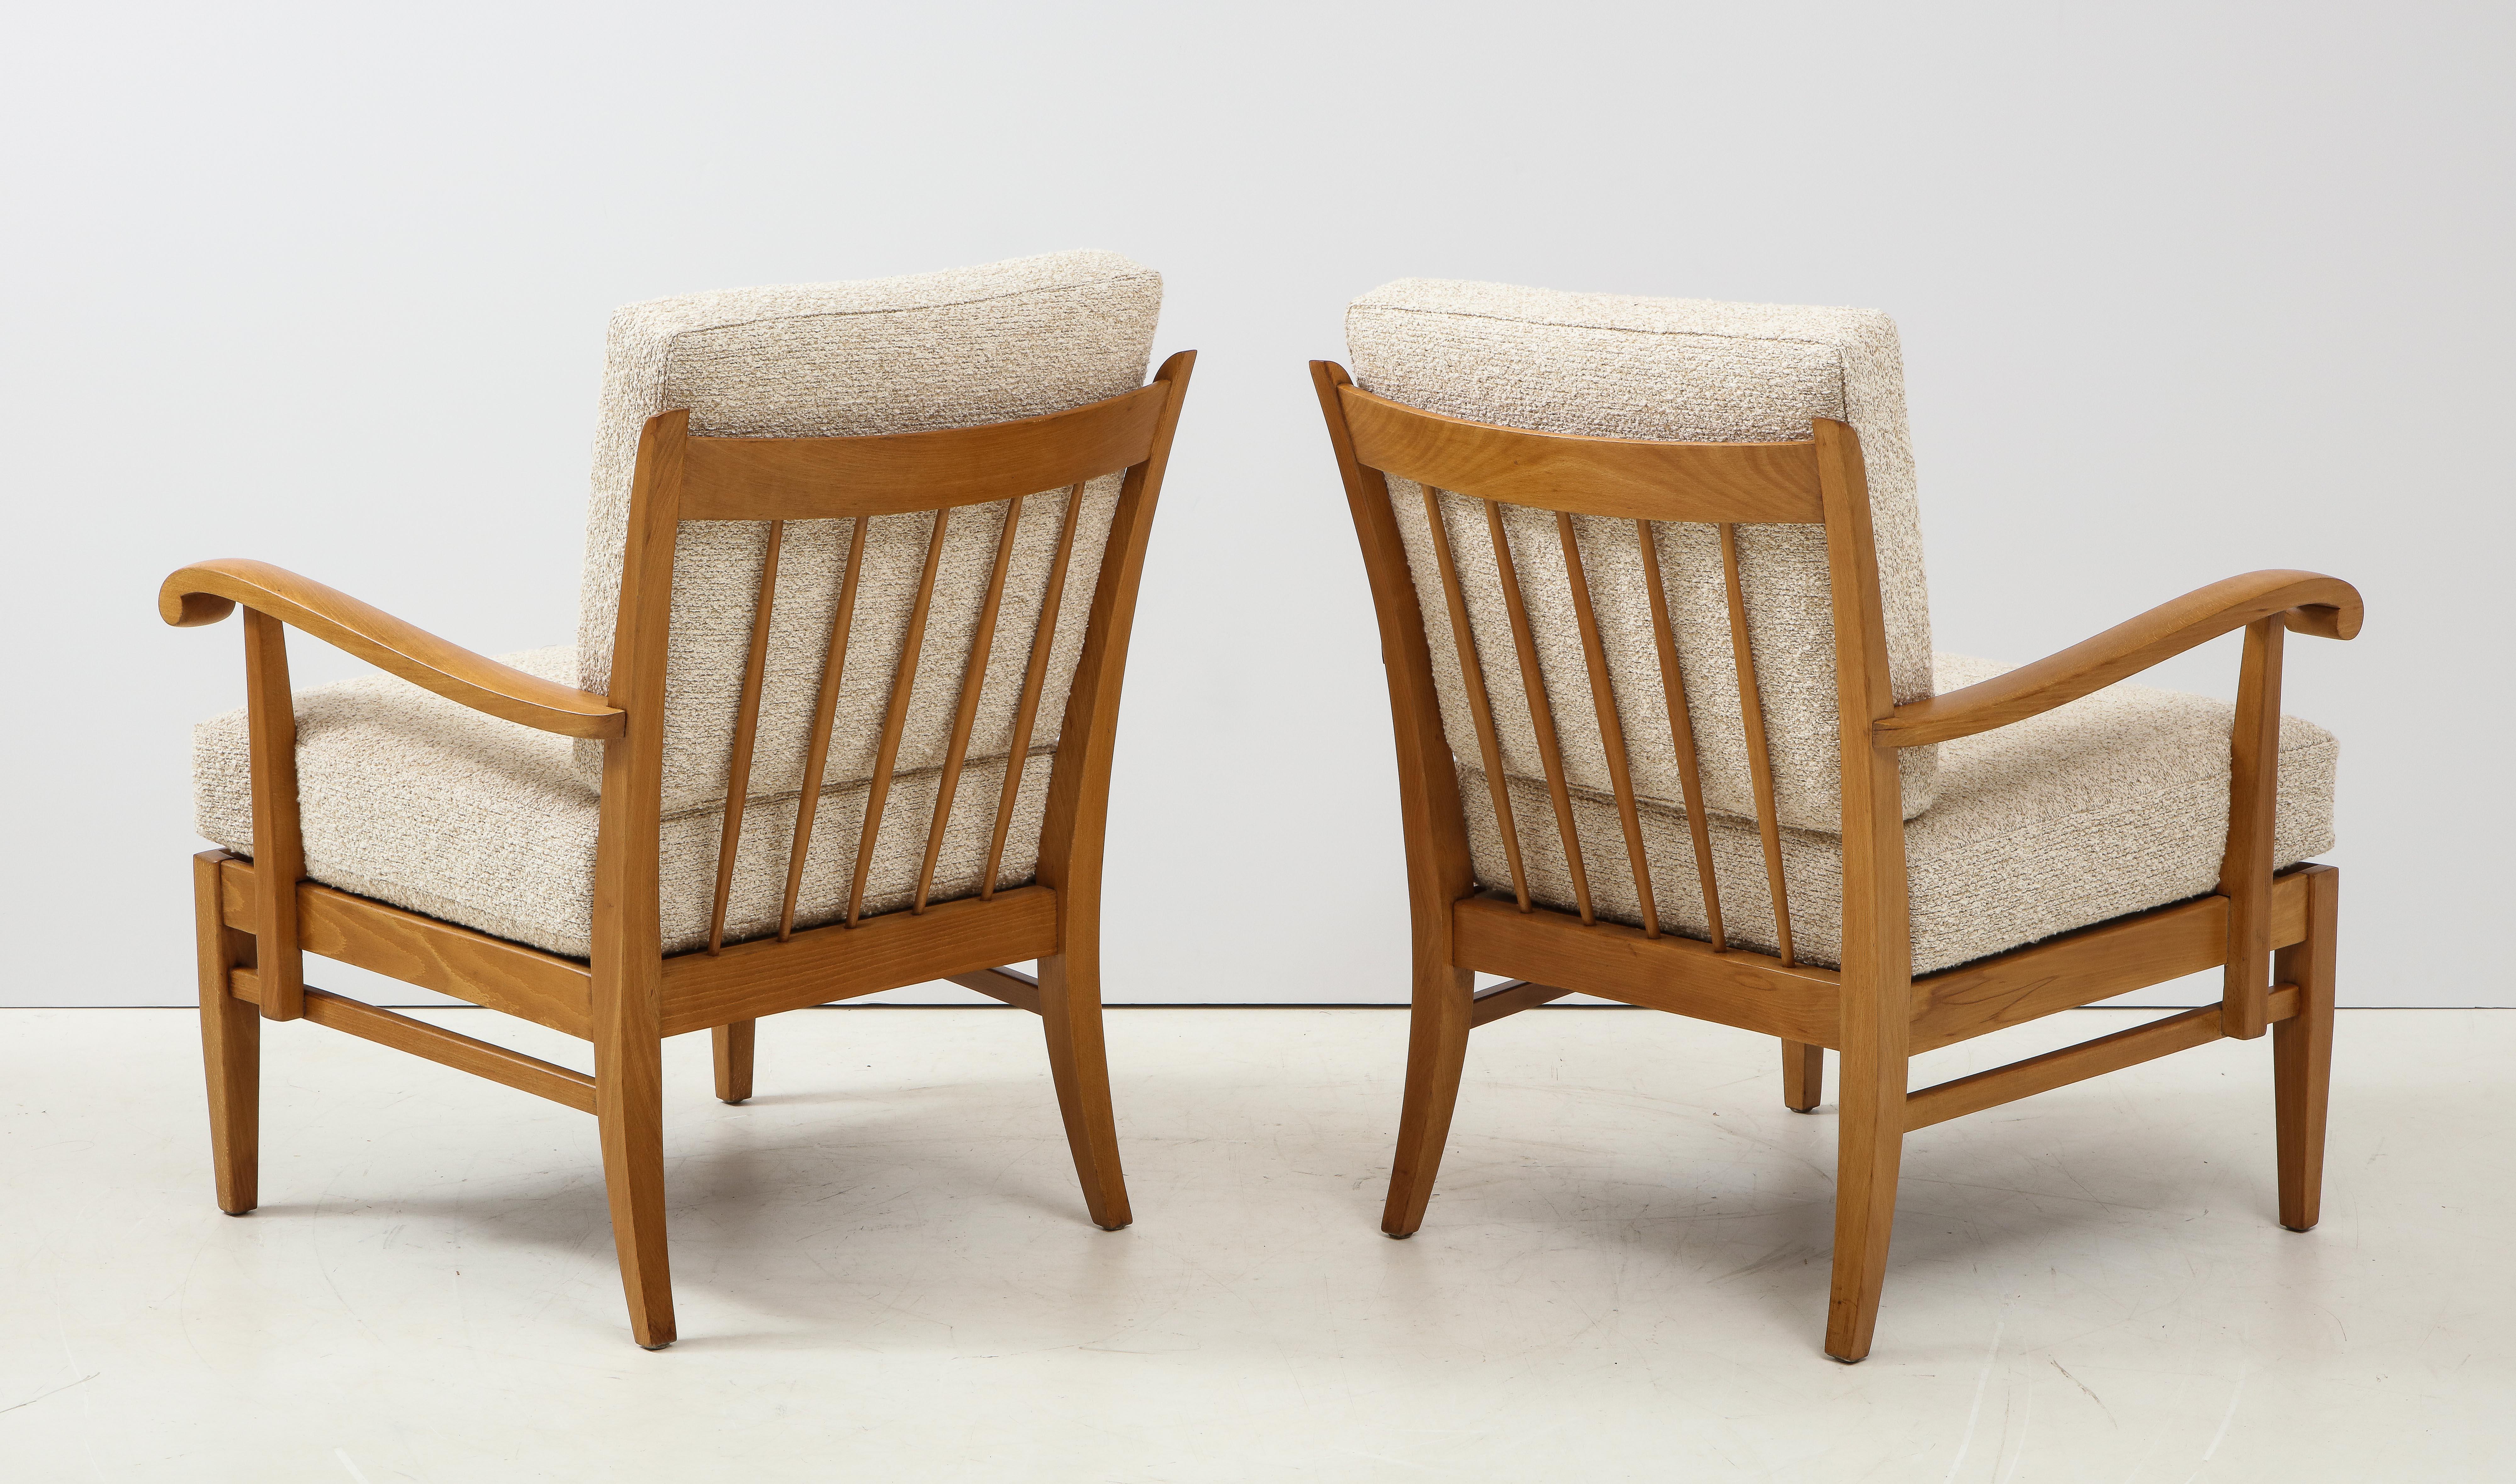 Pair of Maison Gouffé Armchairs, France, circa 1940, Labeled, Numbered 3